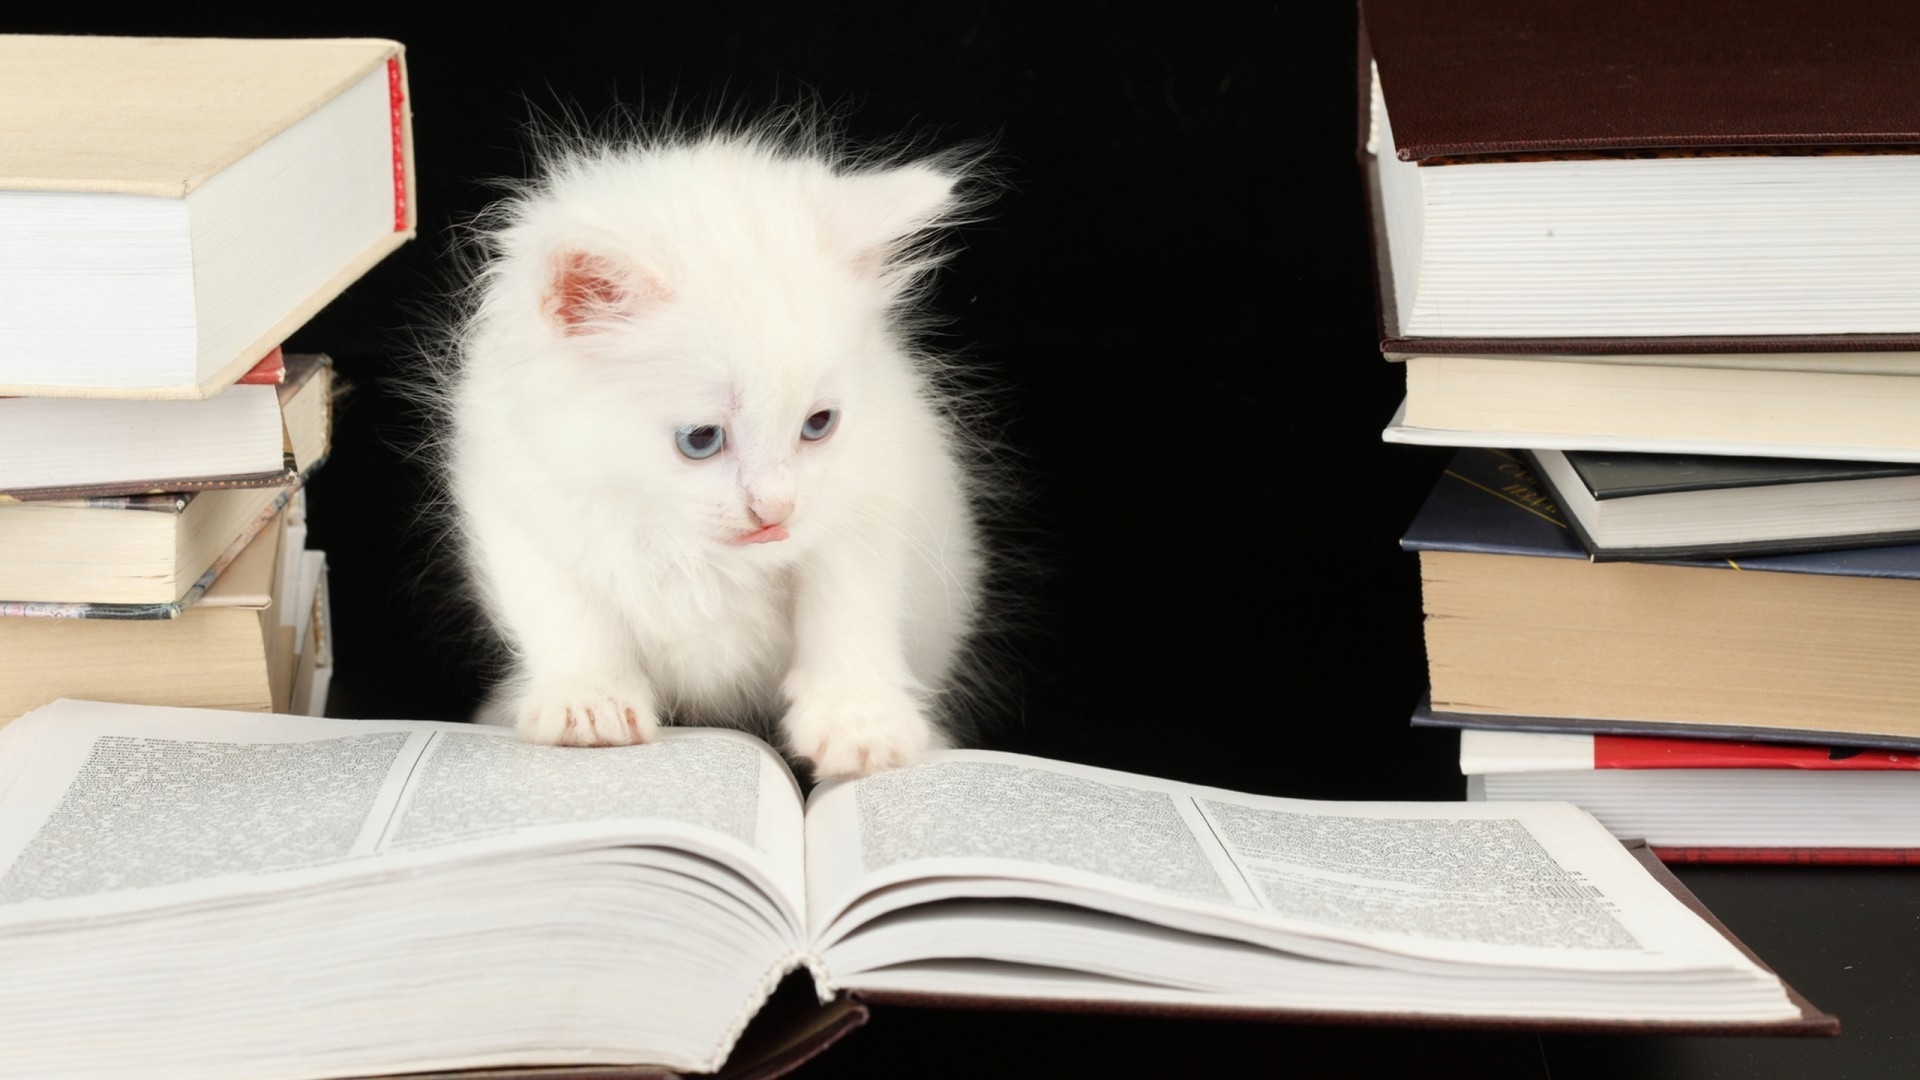 animals, Cats, Felines, Kittens, Cute, Whiskers, Eyes, Books, Humor, Funny Wallpaper